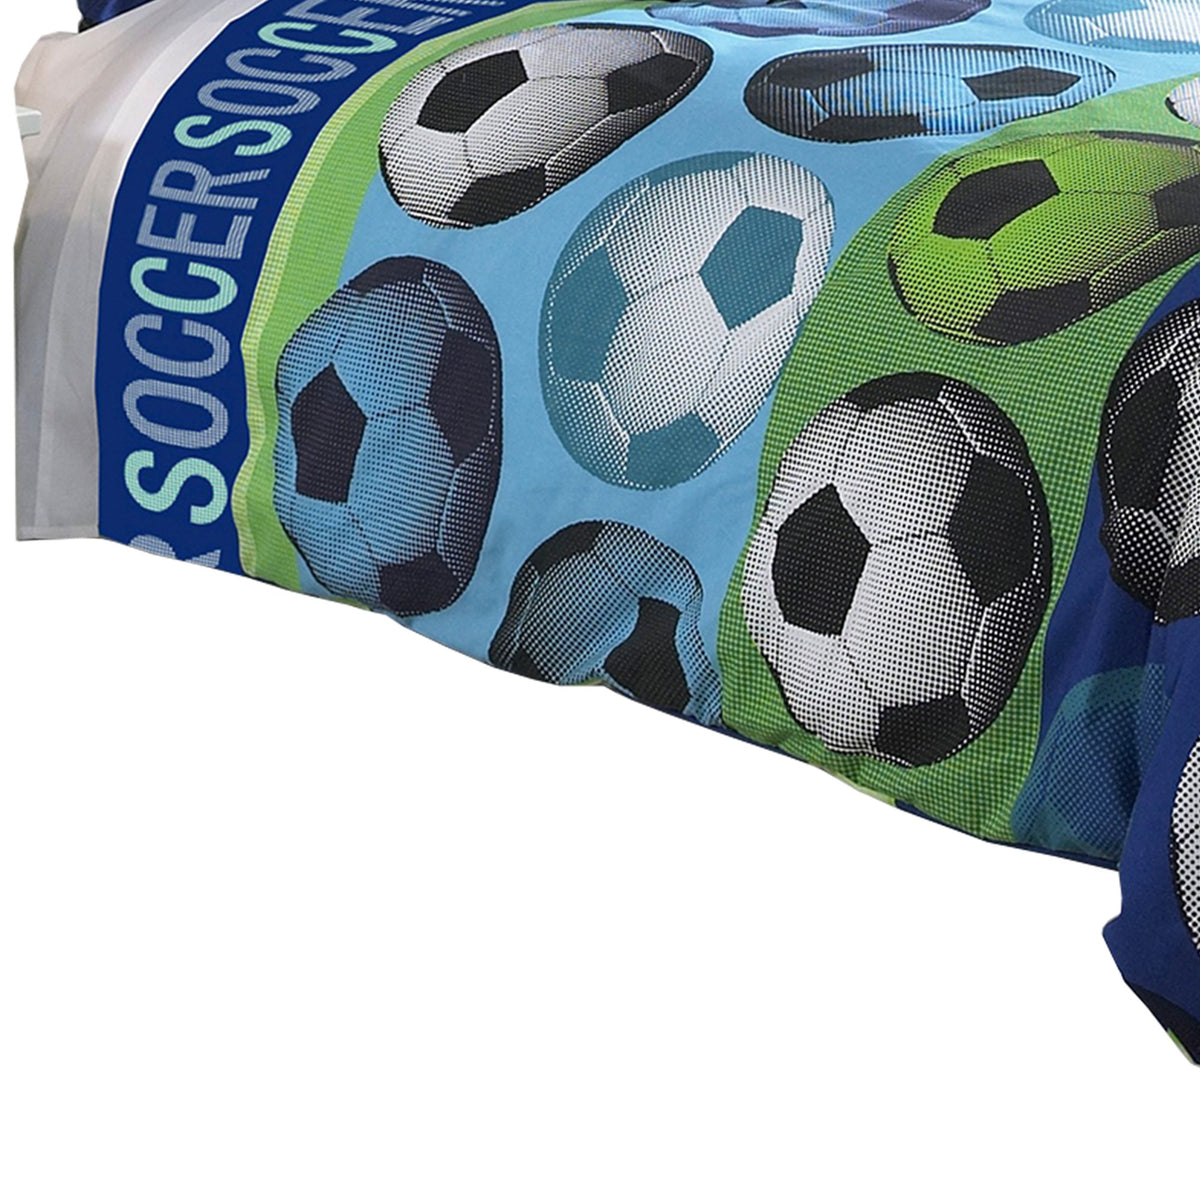 4 Piece Full Size Comforter Set with Soccer Theme, Multicolor - BM225200